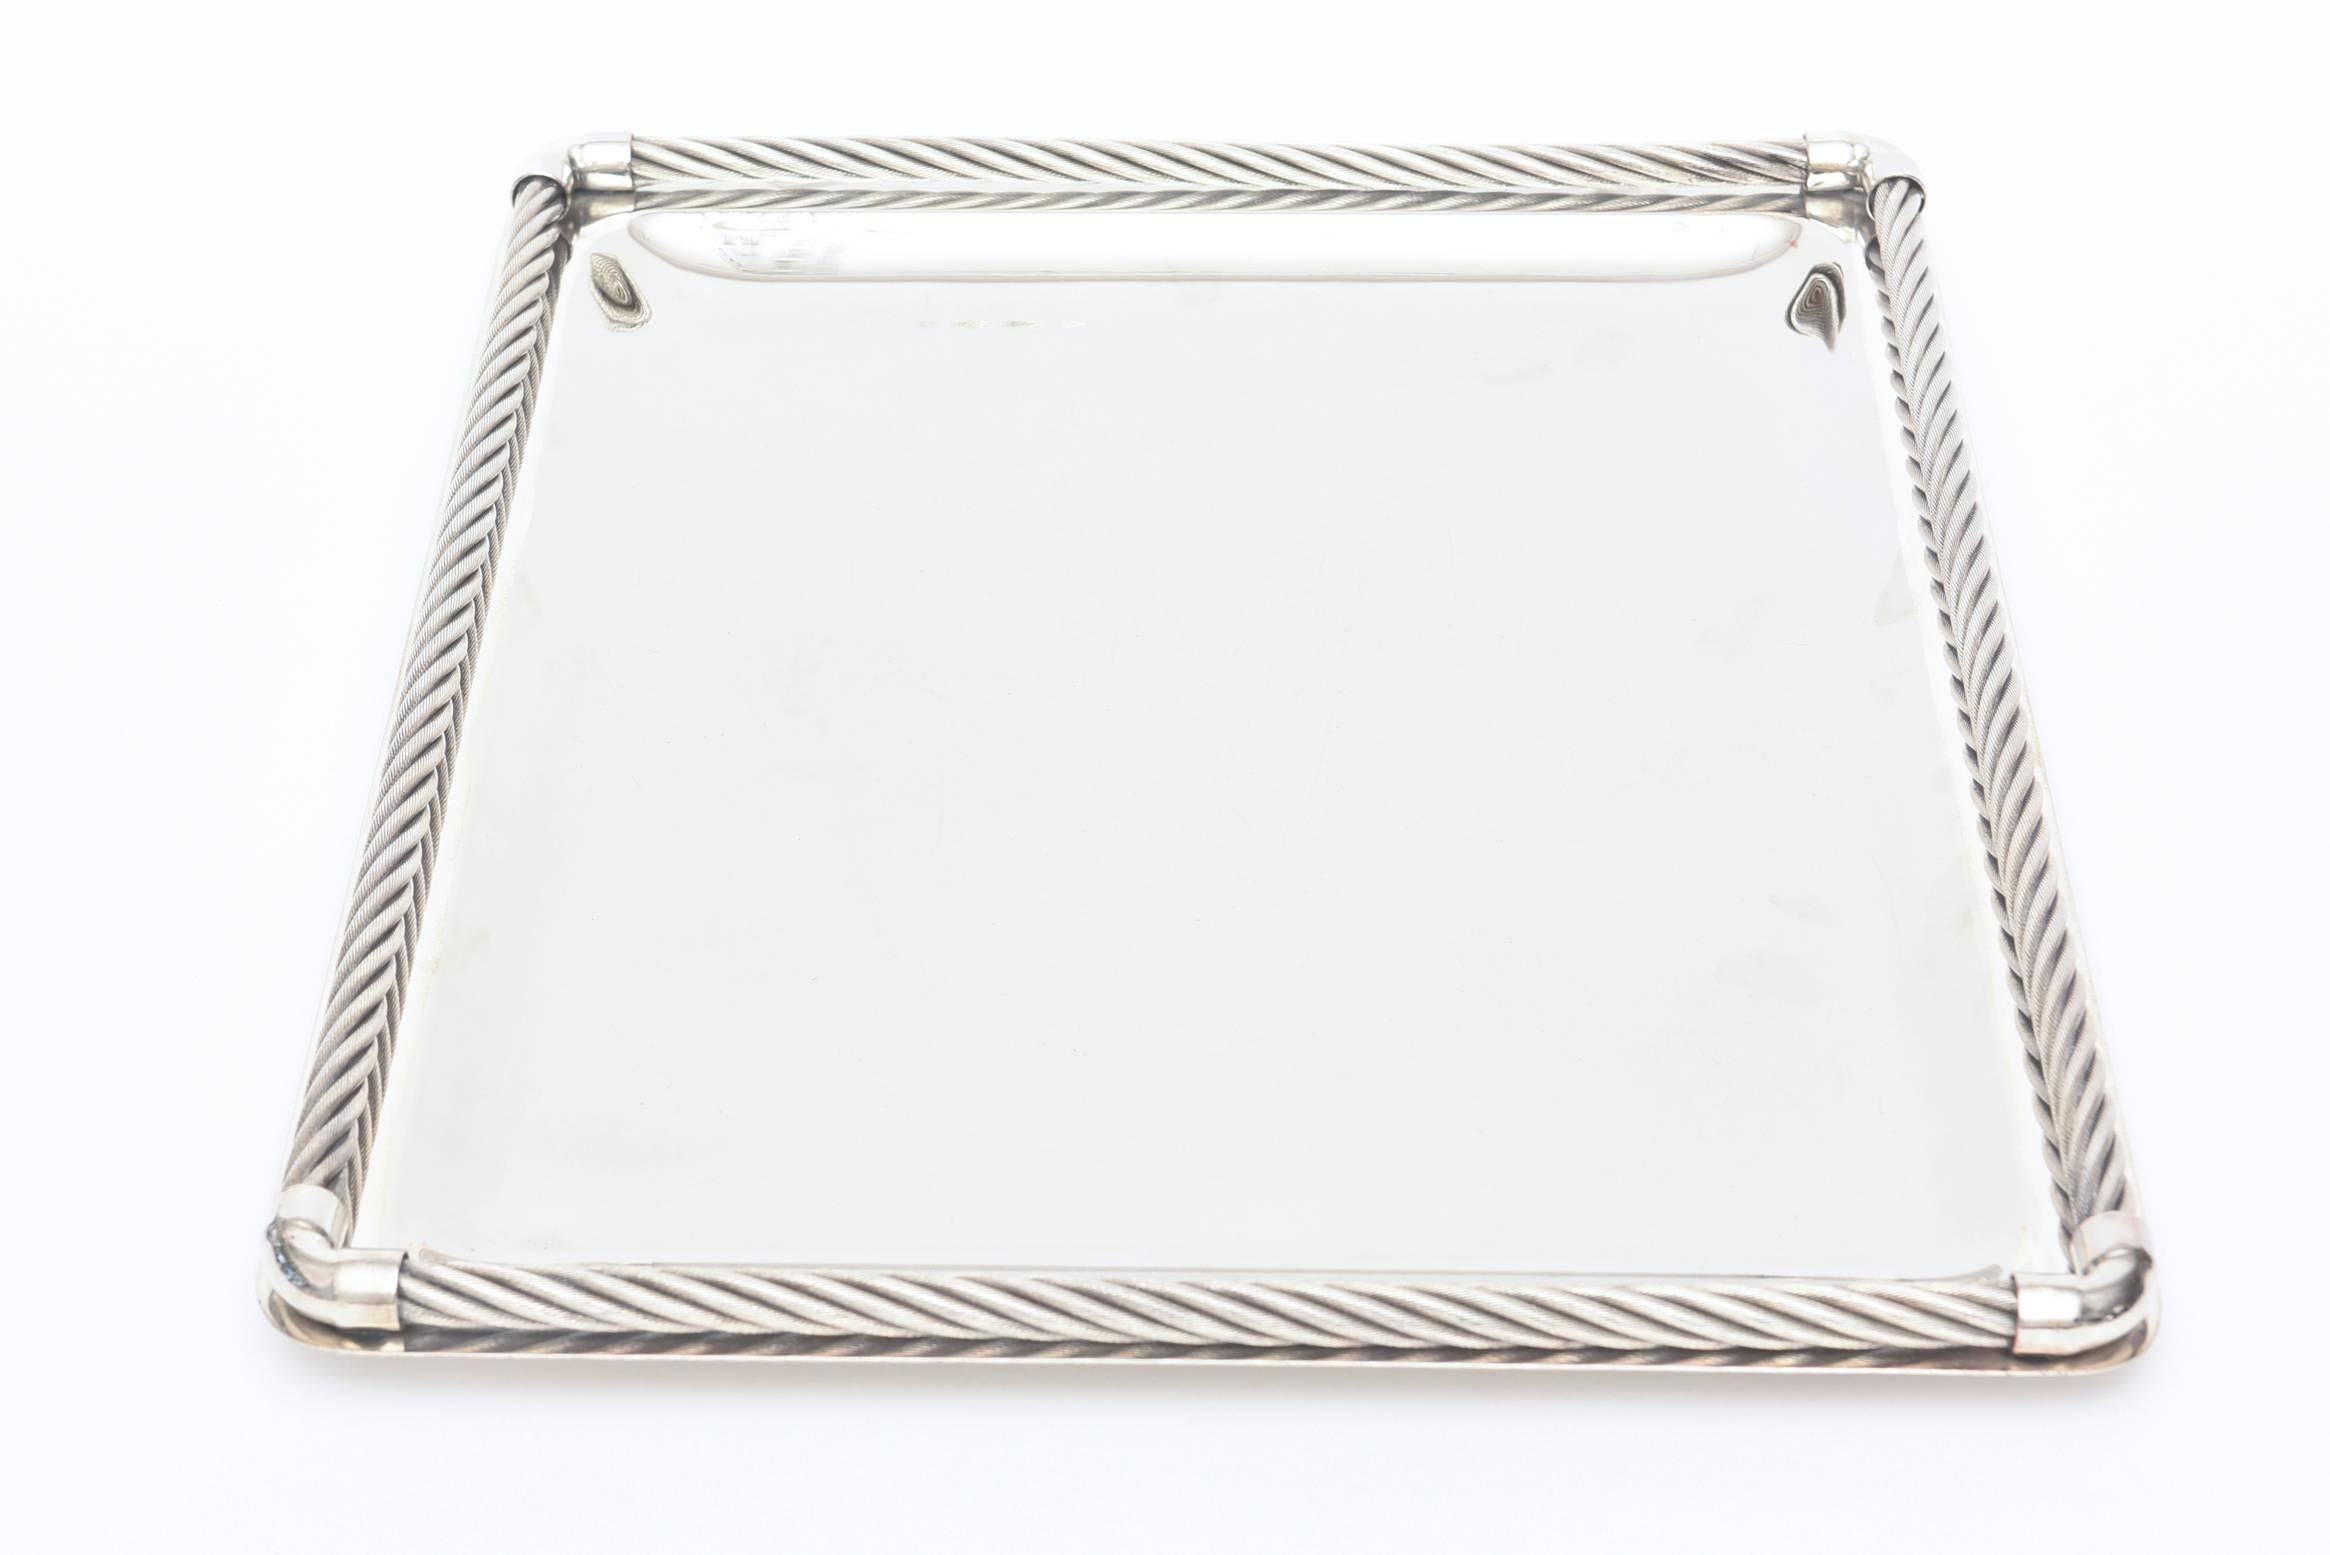 Late 20th Century Signed Italian Gucci Silver- Plate Braided / Rope Tray